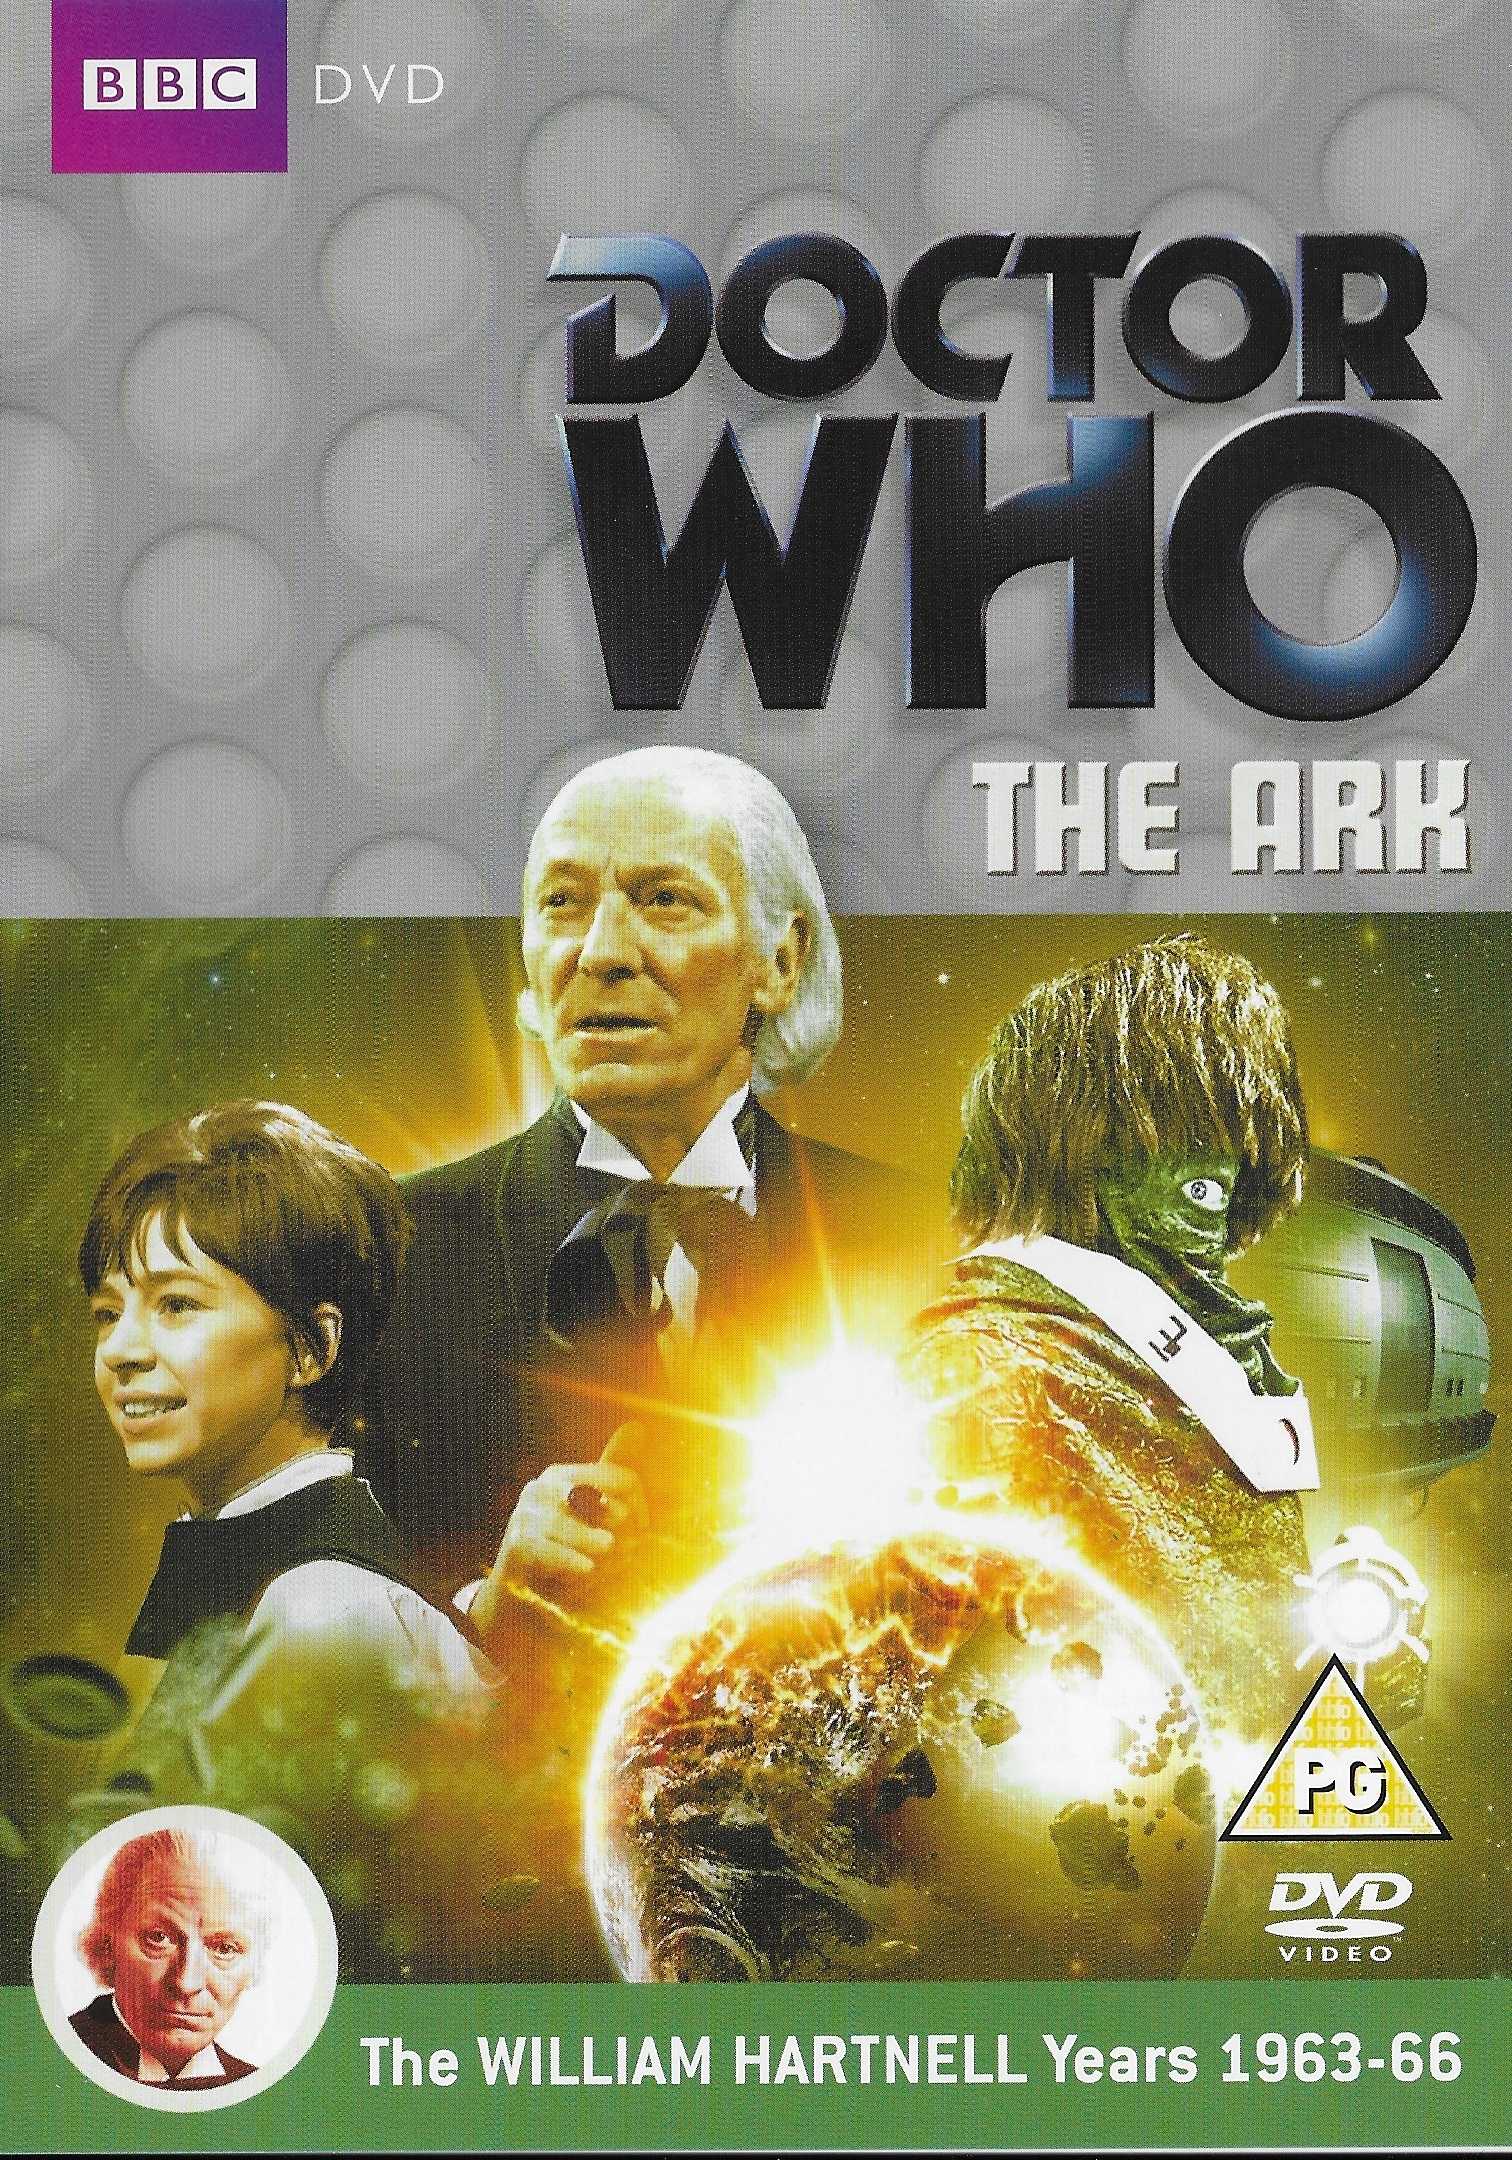 Picture of BBCDVD 2957 Doctor Who - The ark by artist Paul Erickson / Lesley Scott from the BBC dvds - Records and Tapes library